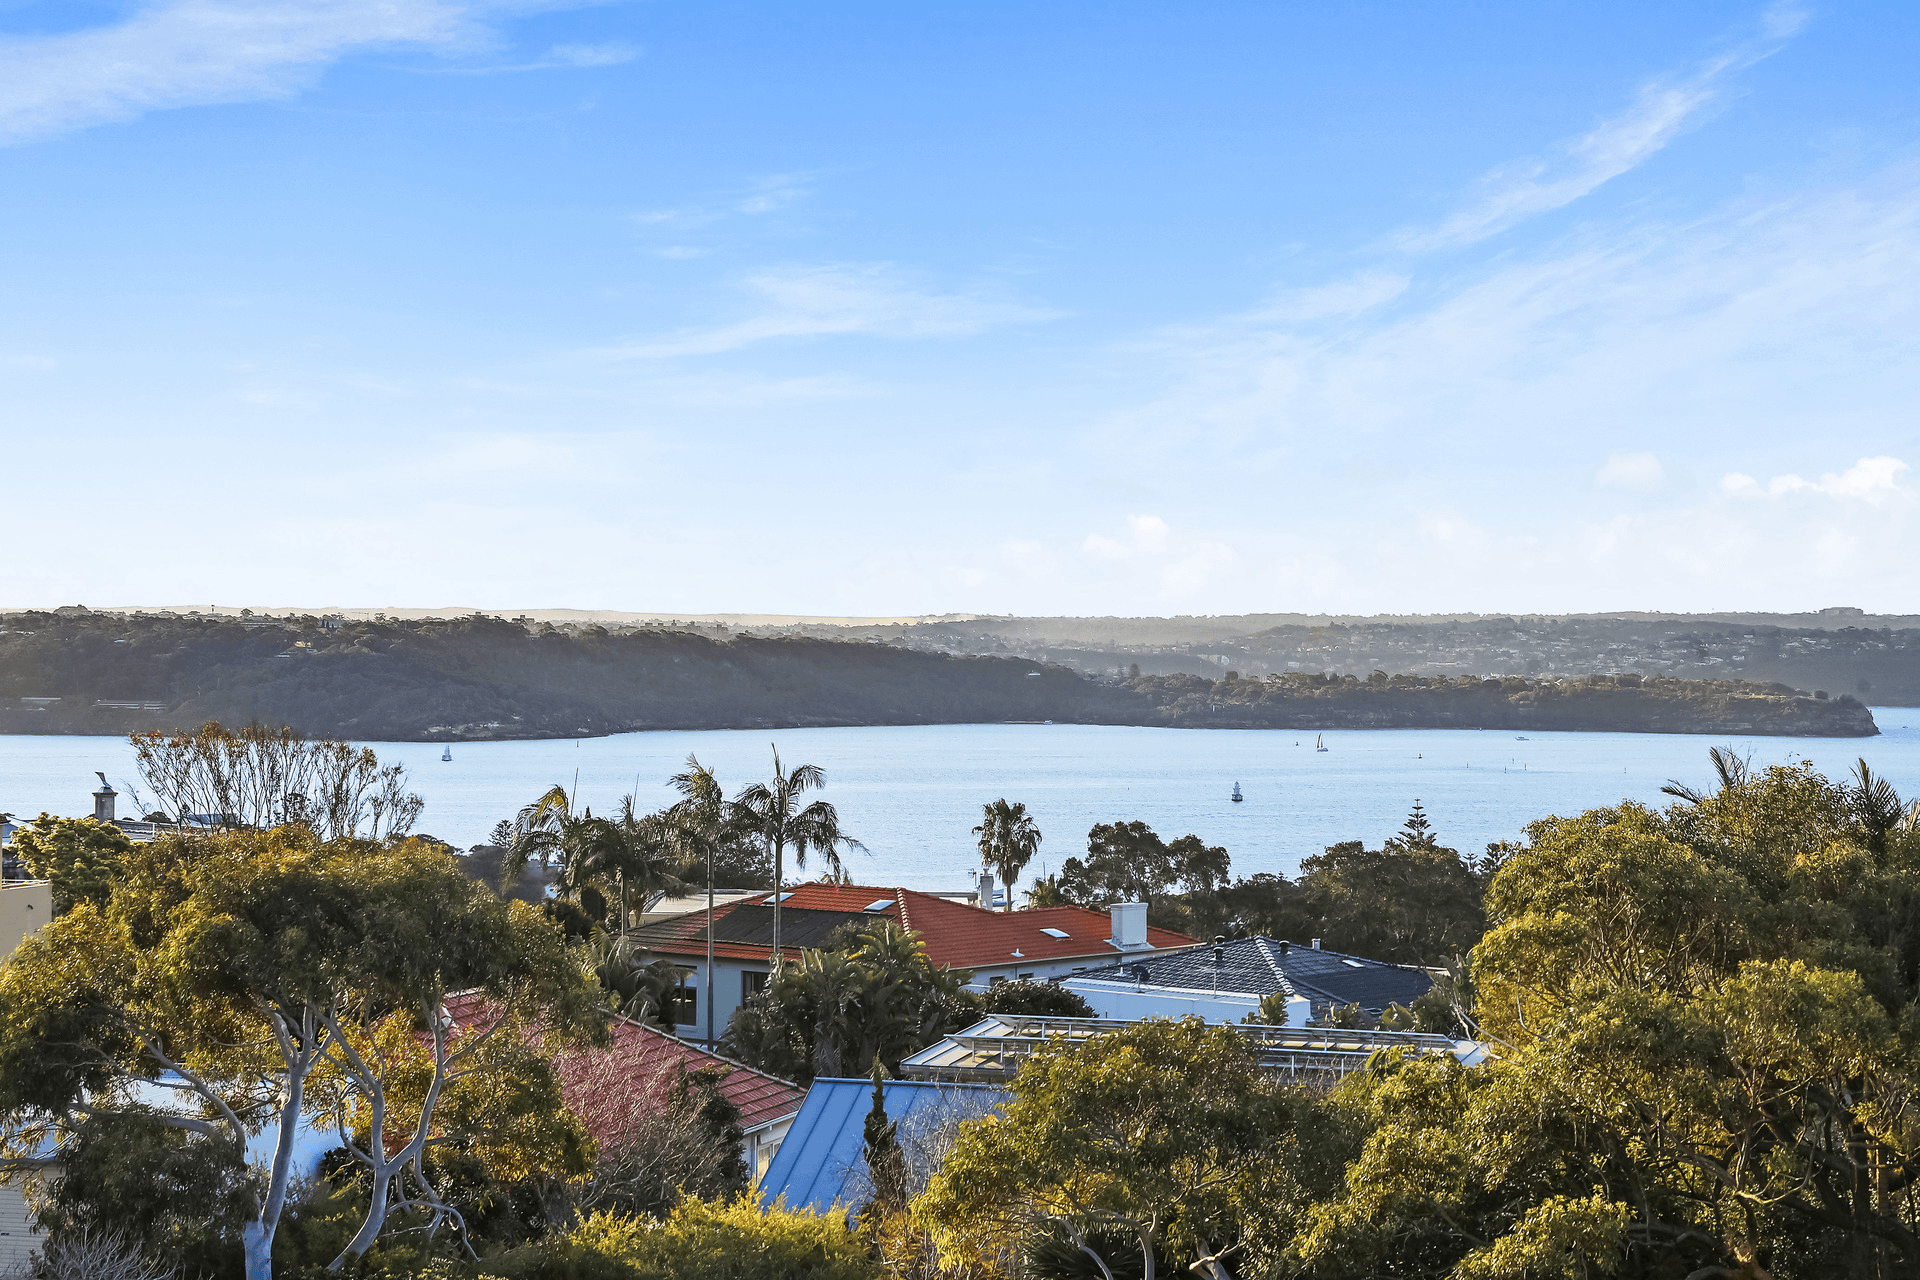 2/765 Old South Head Road, Vaucluse, NSW 2030